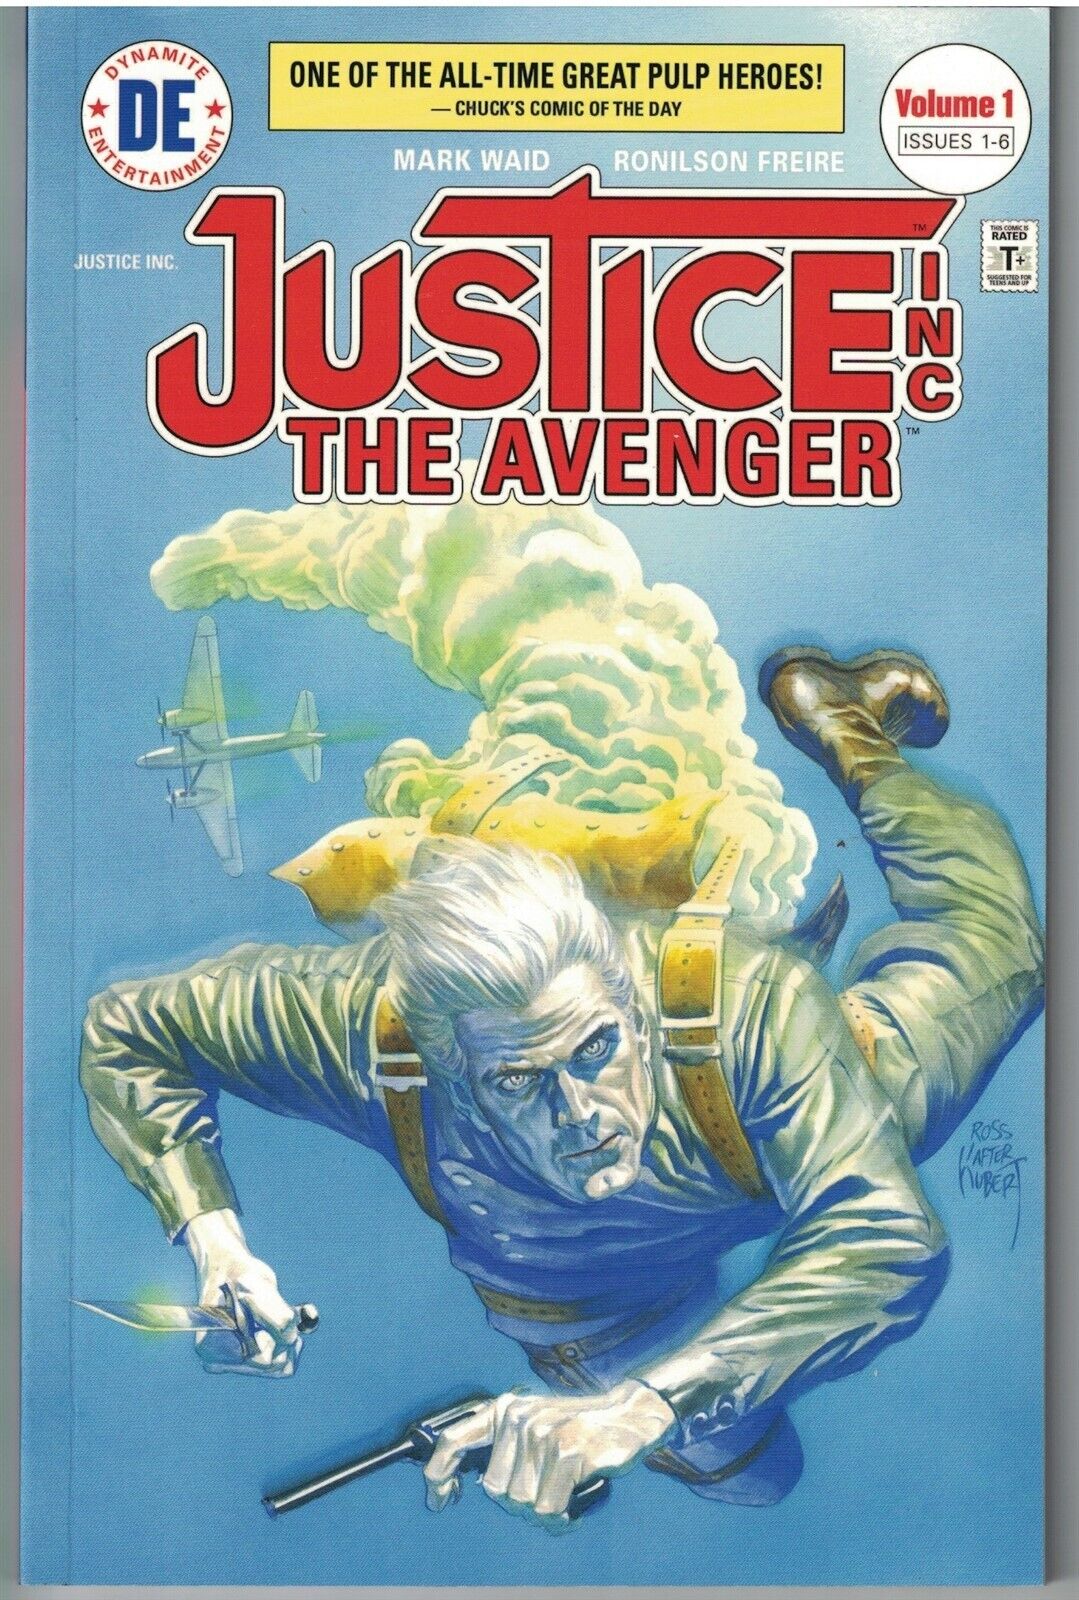 JUSTICE INC THE AVENGER TP TPB $19.99srp Mark Waid Alex Ross Dynamite NEW NM